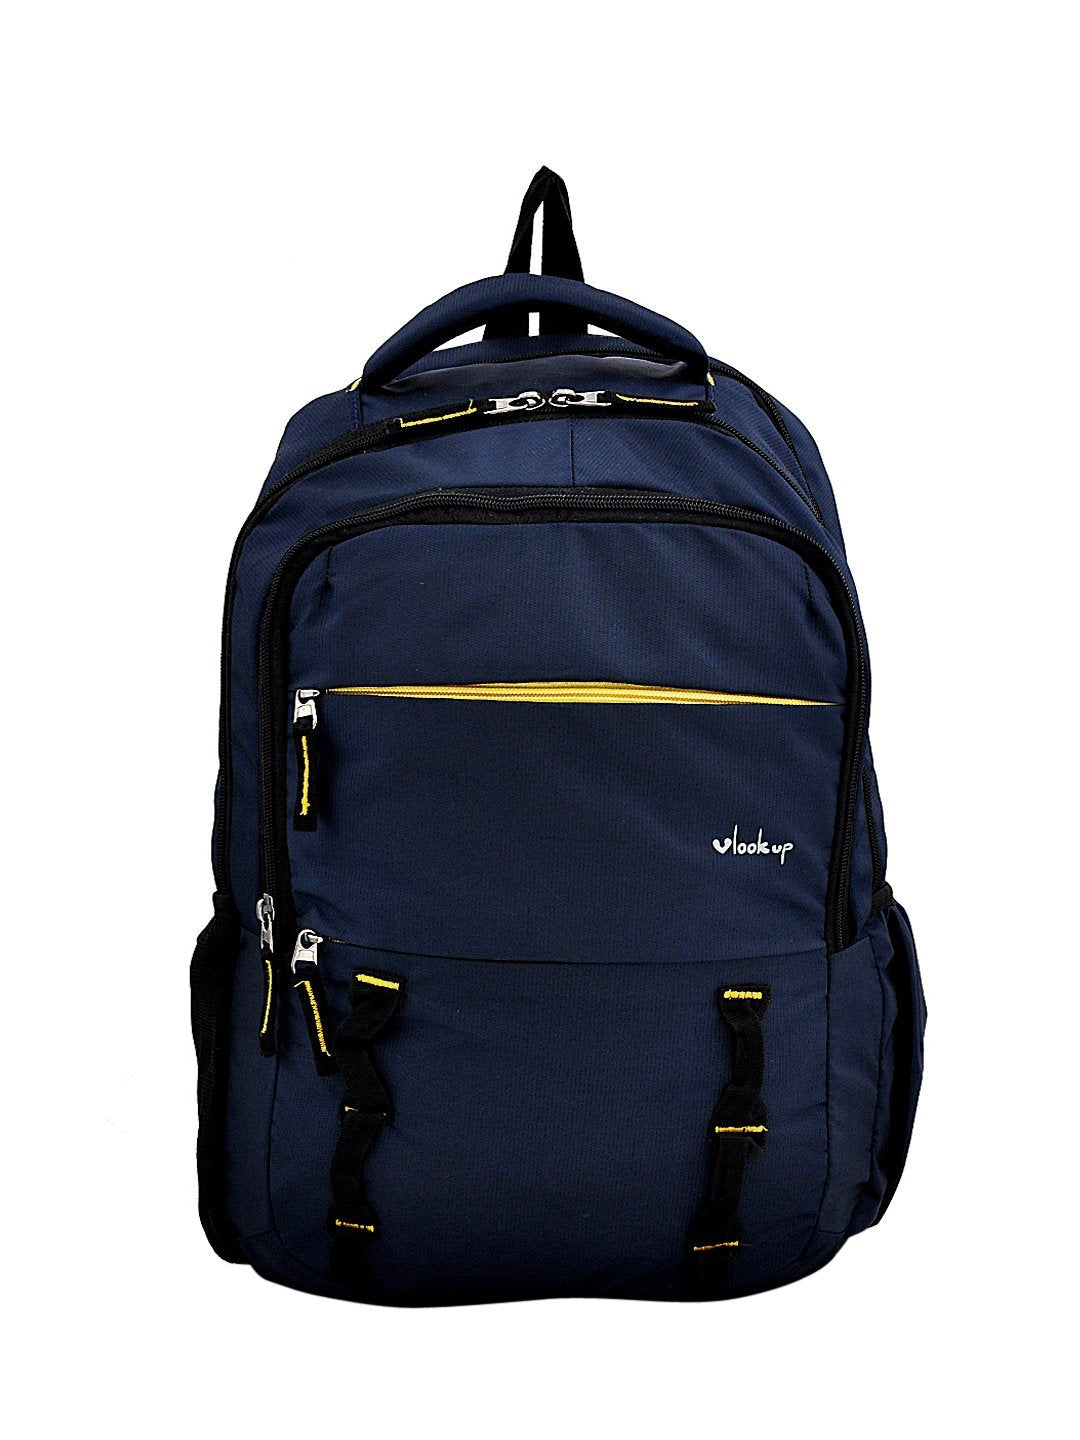 Blue Multi compartment Laptop Backpack